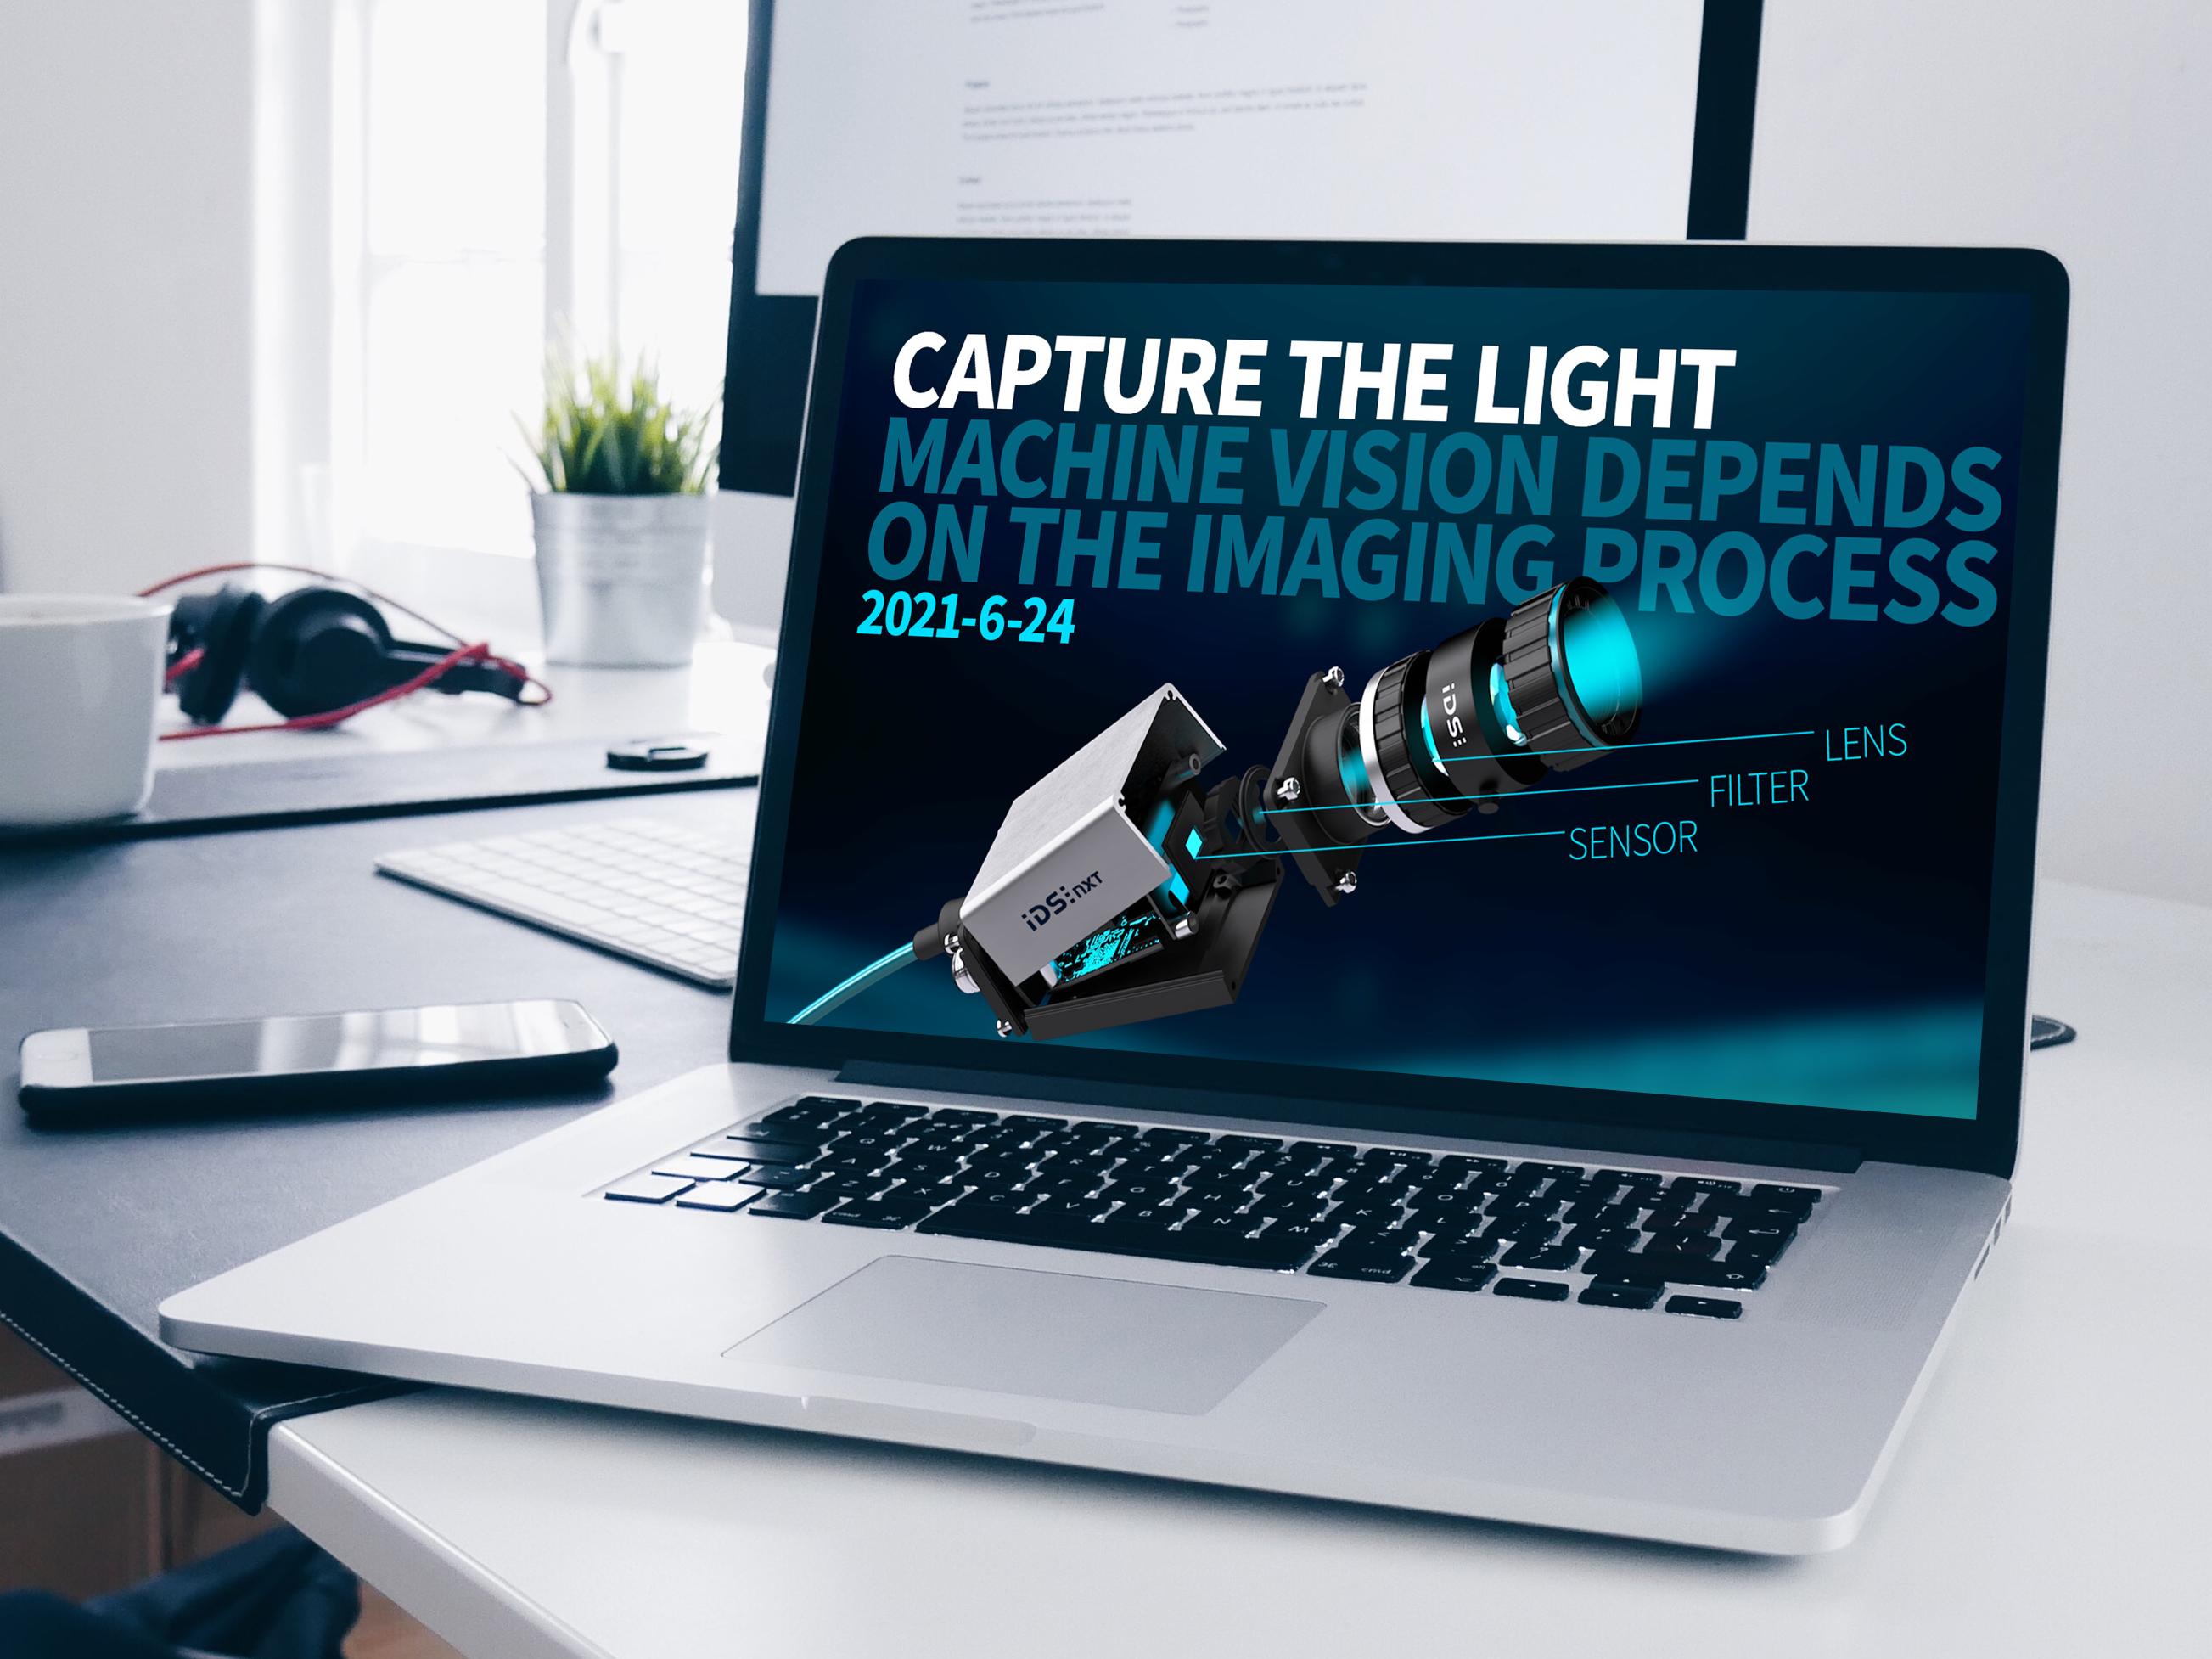 Engage with image processing experts to ‘Capture the Light’ 